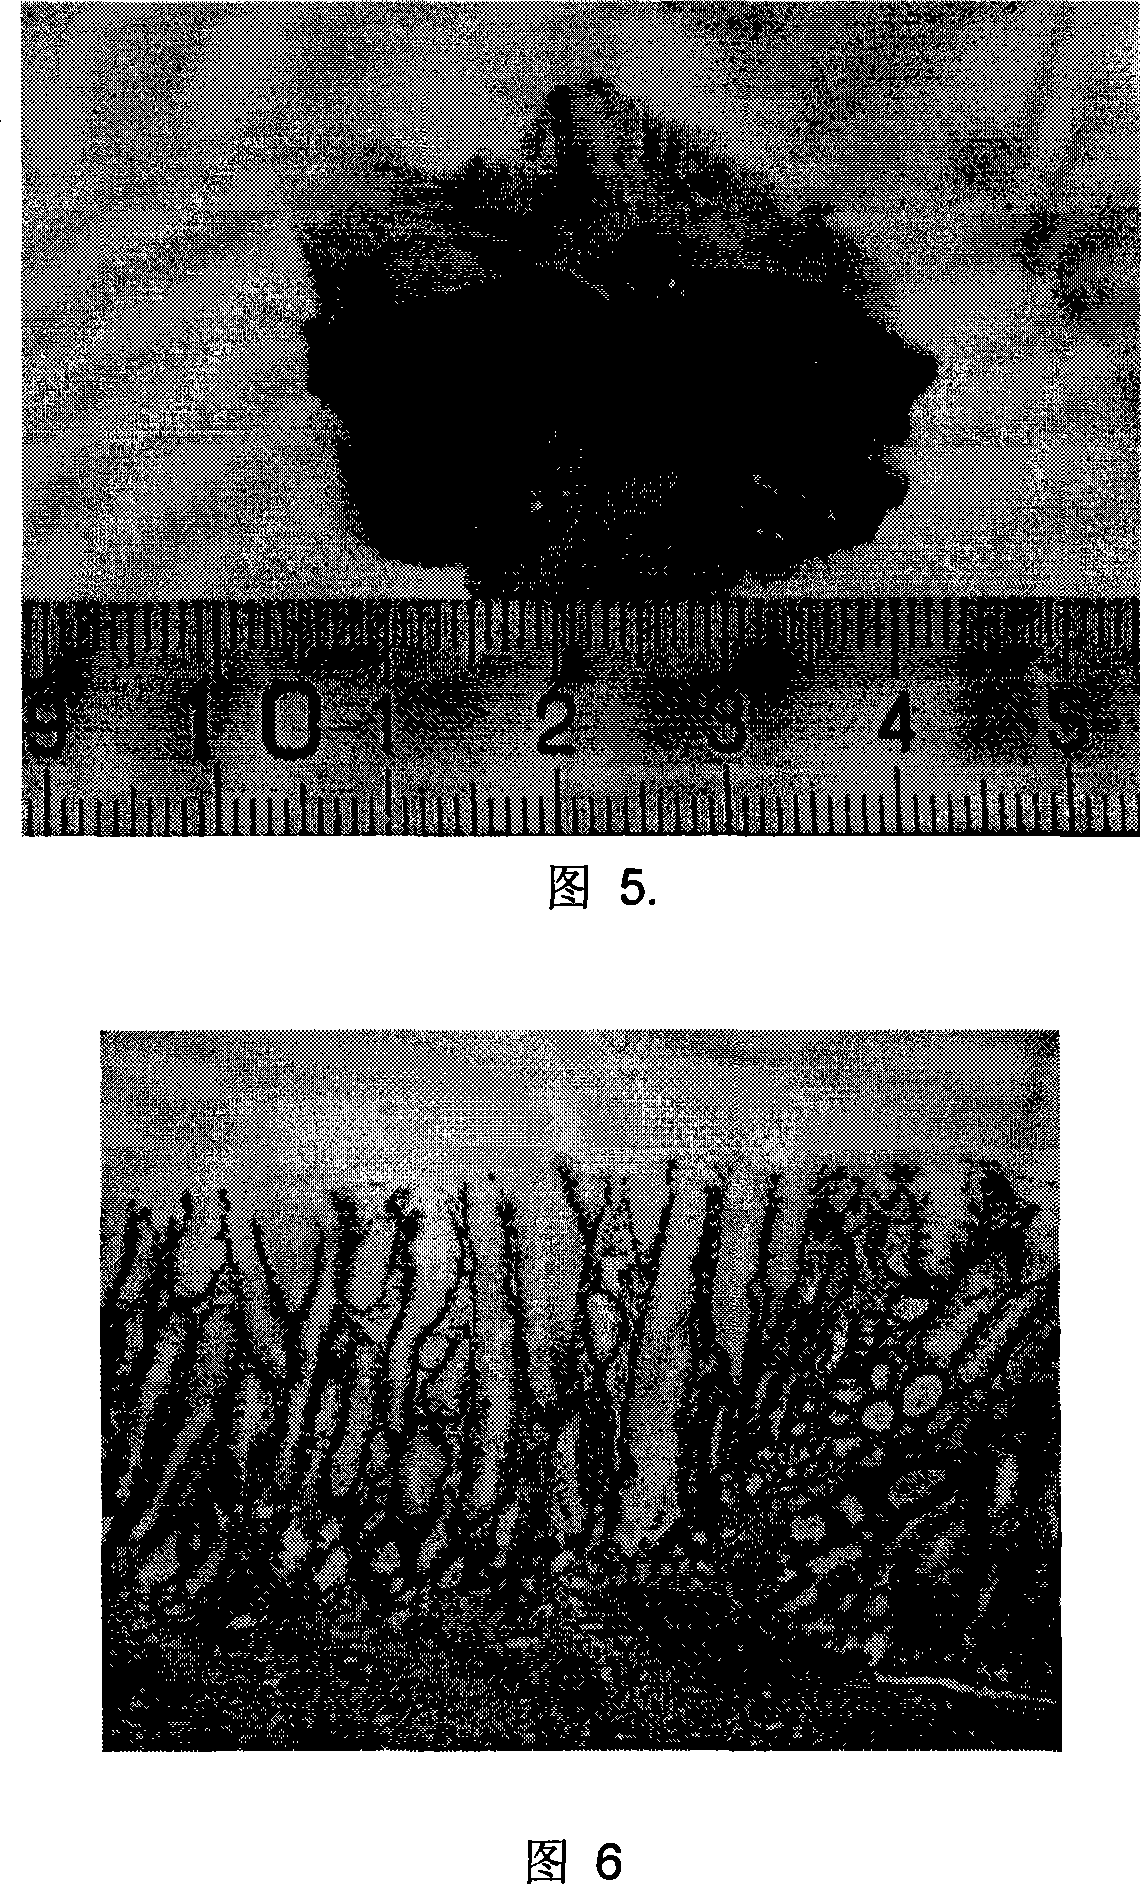 Method for setting acetic-acid gastric ulcer disease recurrence model